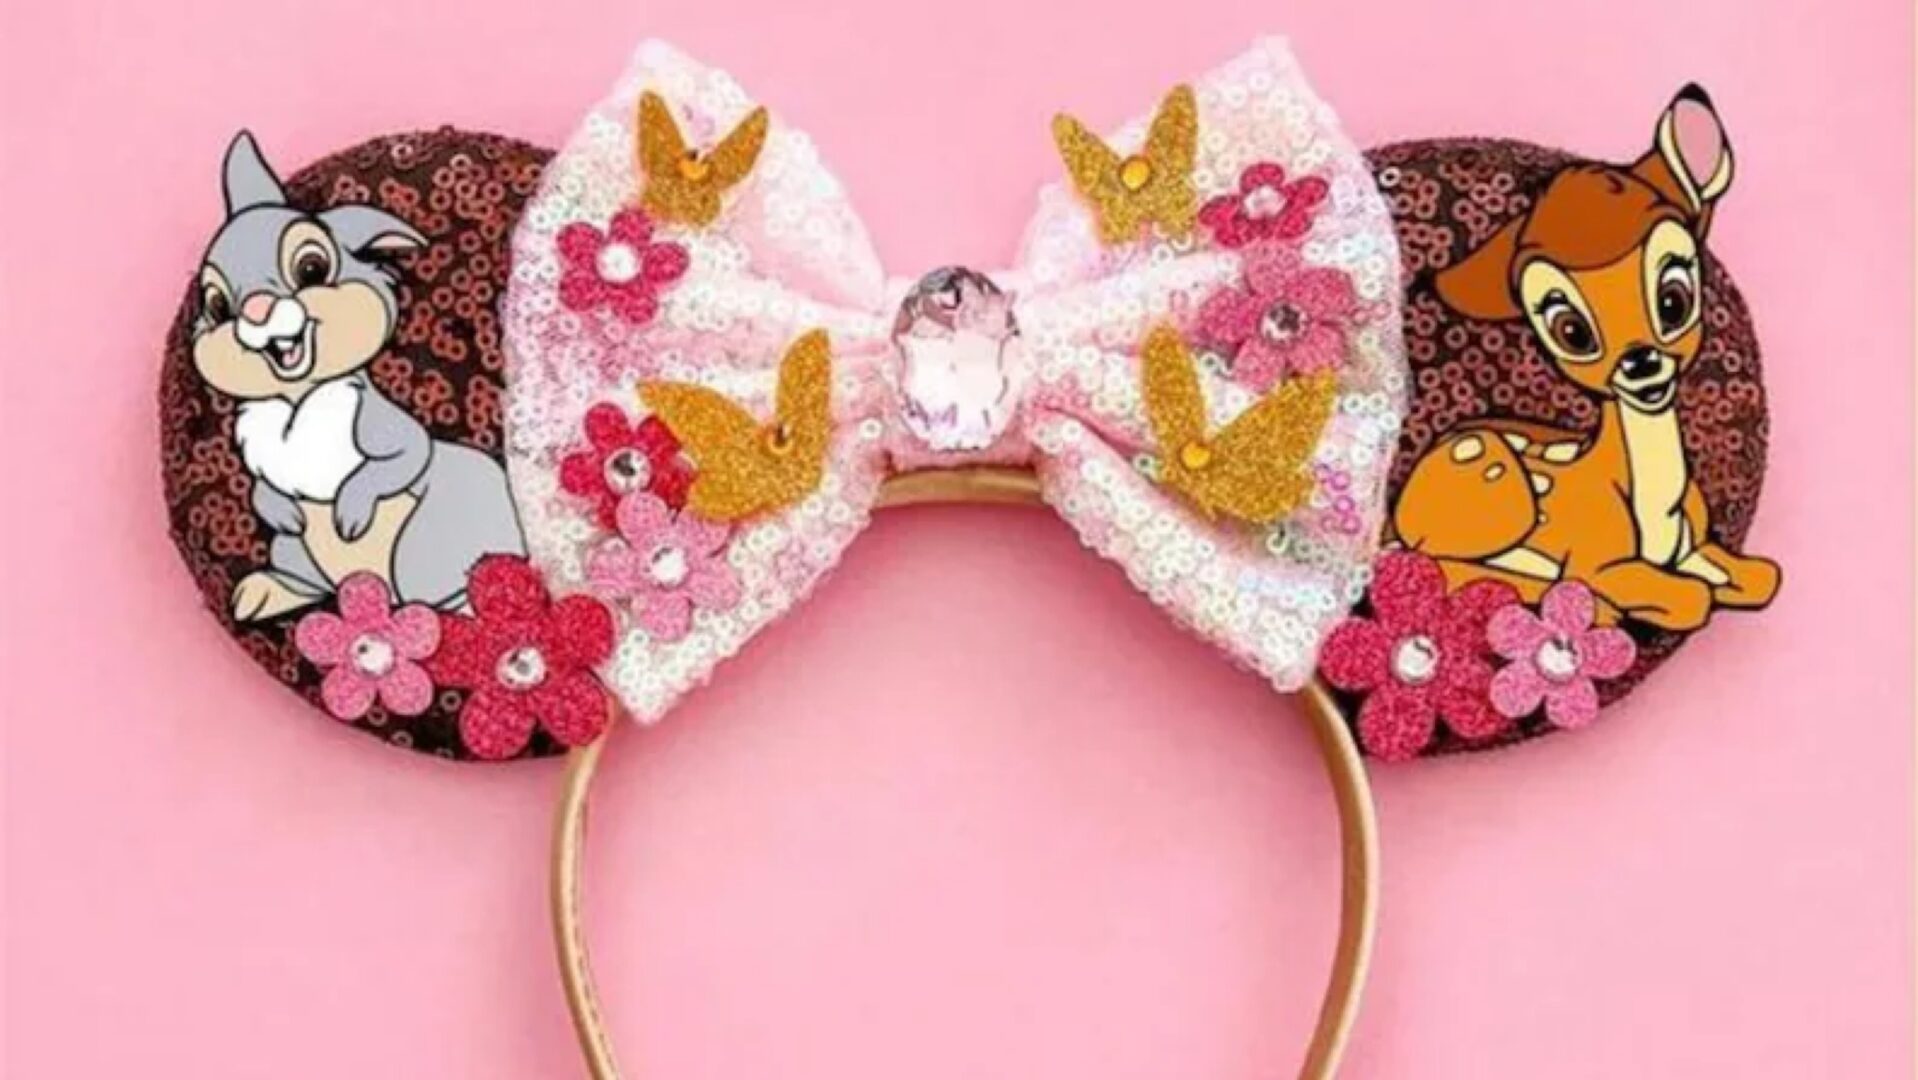 Beautiful Bambi Minnie Ears To Add To Your Collection!